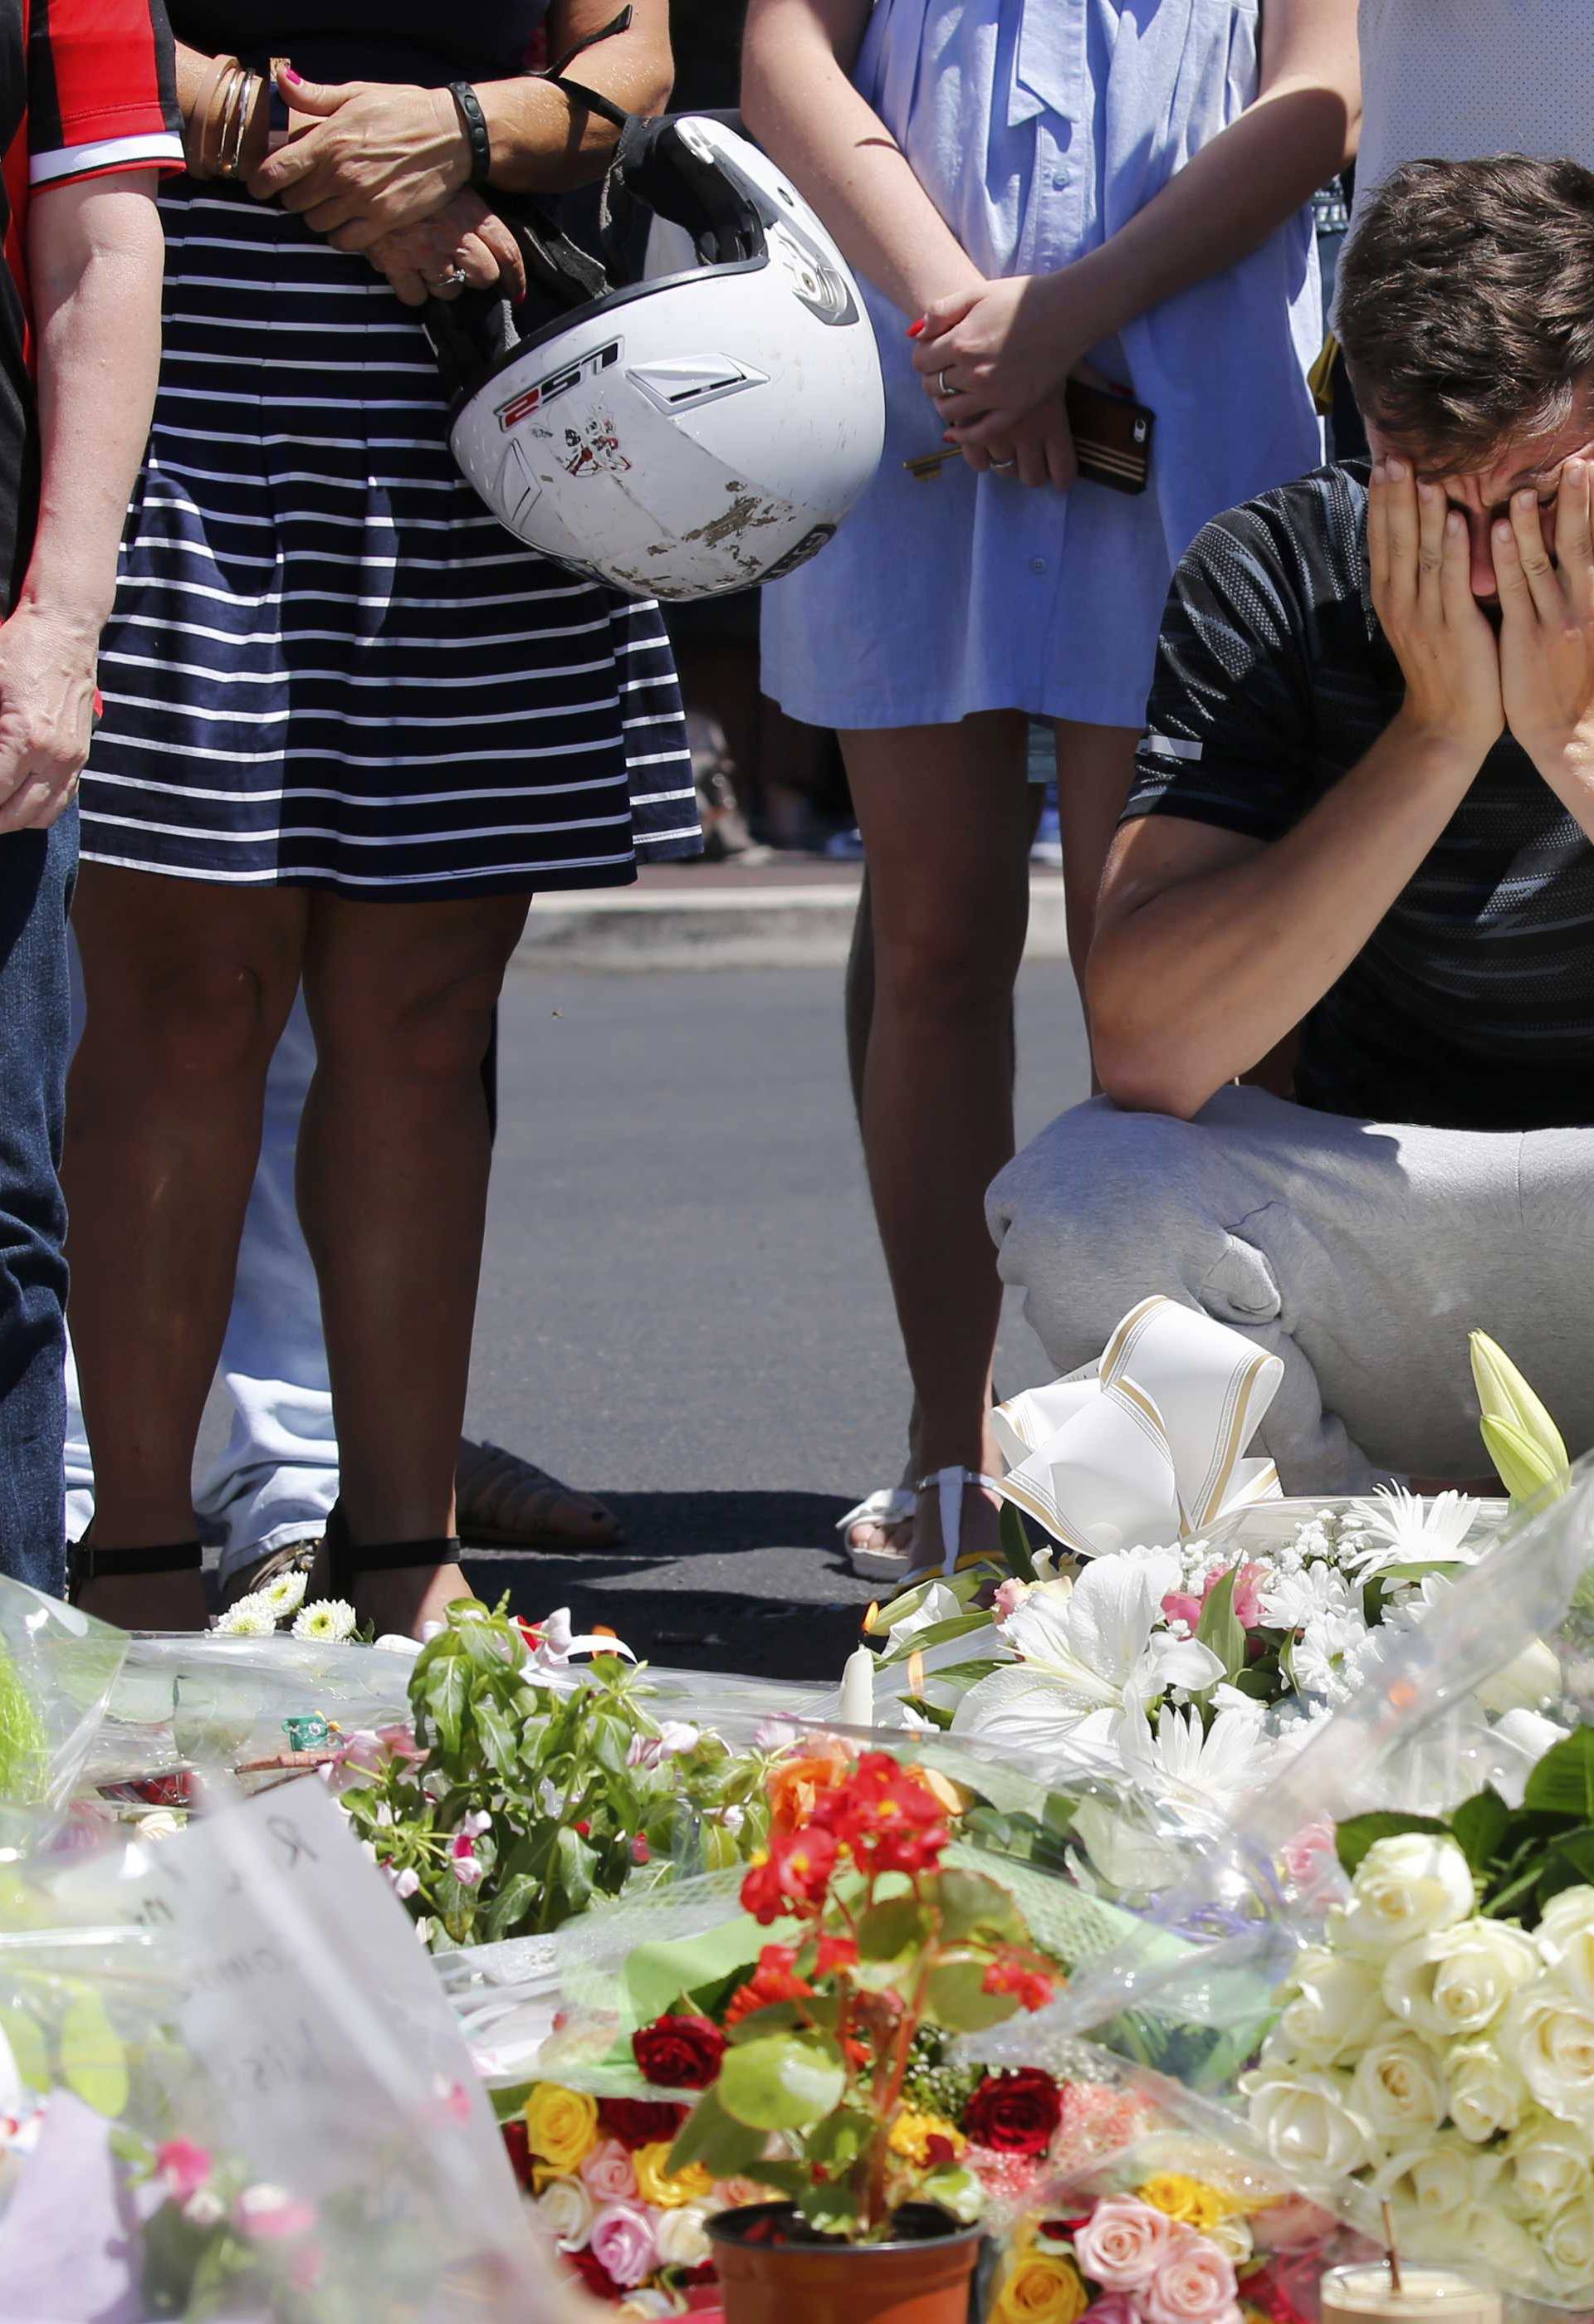 A man reacts near flowers placed in tribute to victims, two days after an attack by the driver of a heavy truck who ran into a crowd on Bastille Day killing scores and injuring as many, in Nice